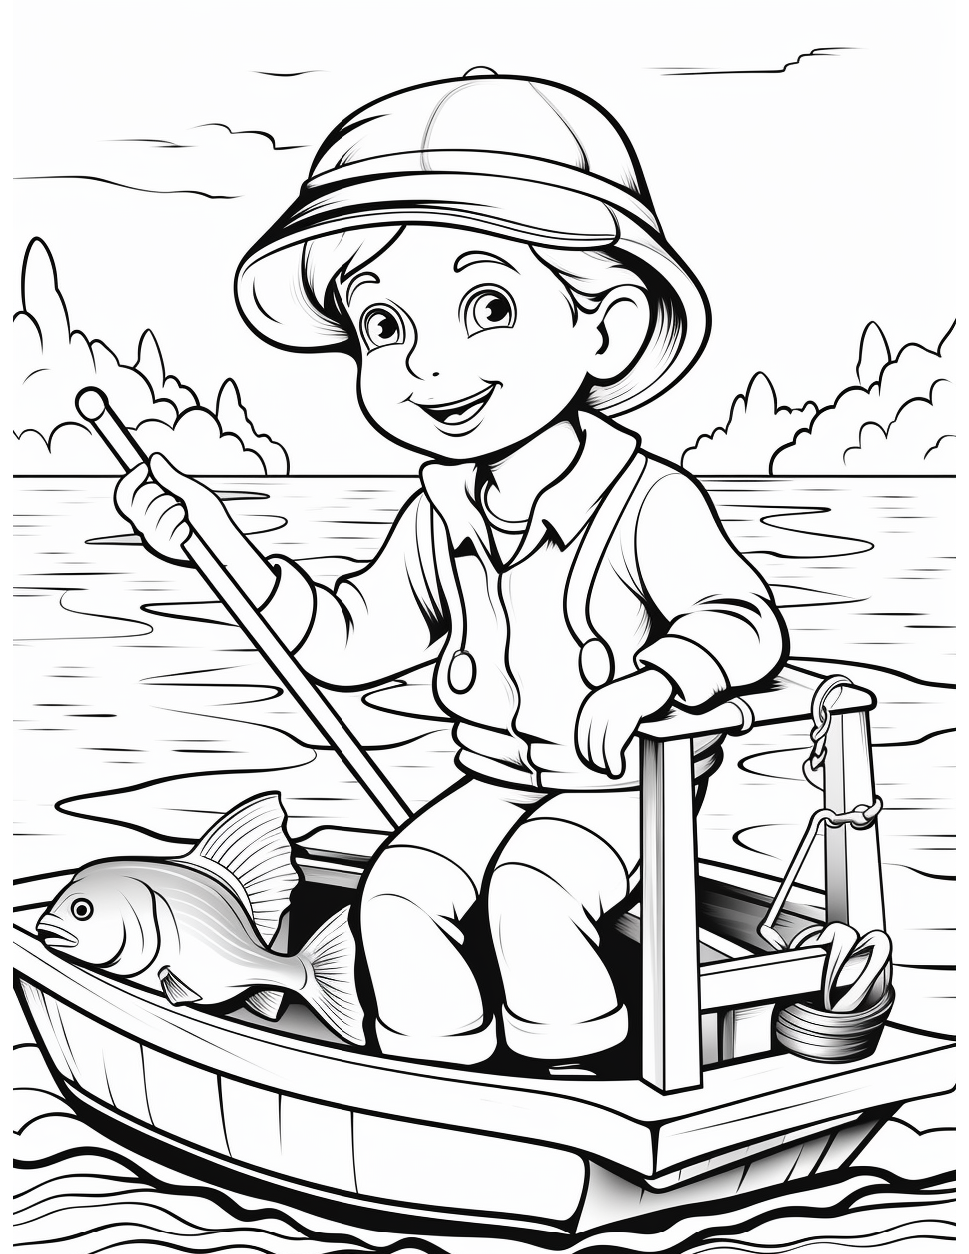 Fishing Coloring Page 10 - Line drawing of a boy fishing on a boat